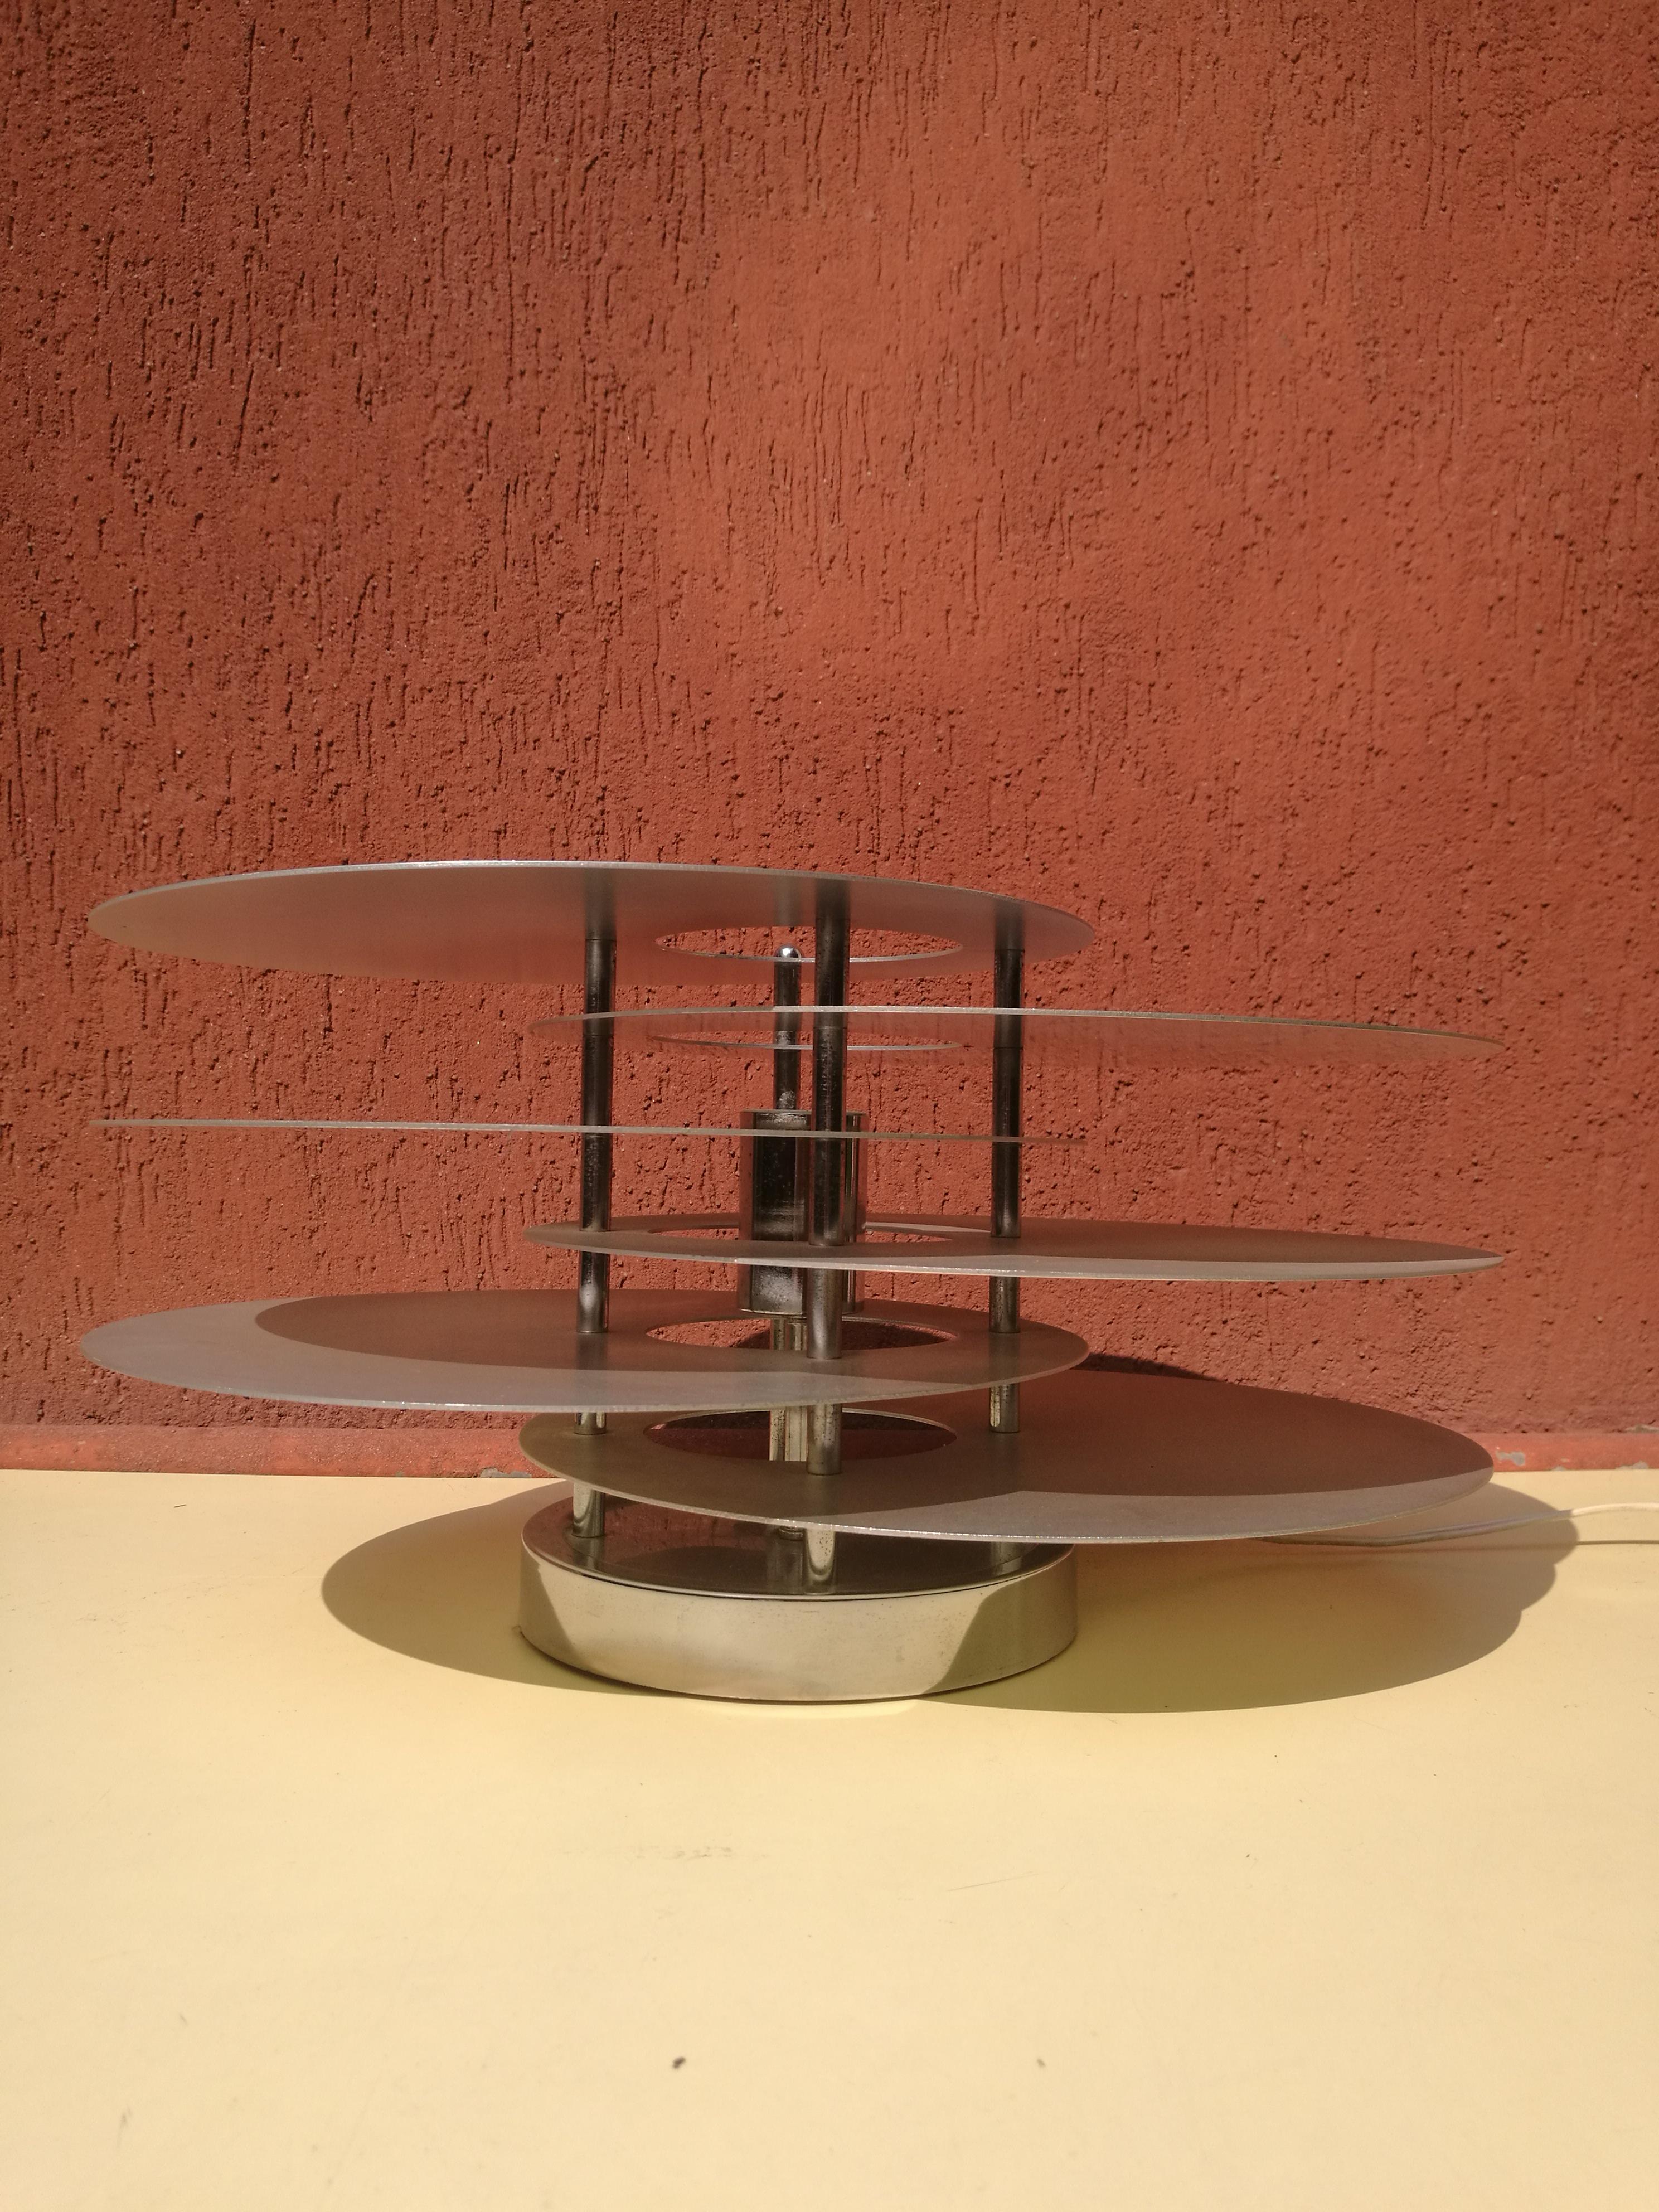 Decorative table lamp in aluminum frosted.
6 disc in aluminum create this amazing typical Space Age design and inventory
The lamp is from Italy design from 1960-1970 period.
This is VERY RARE! I just see one in my life some years ago and this today,